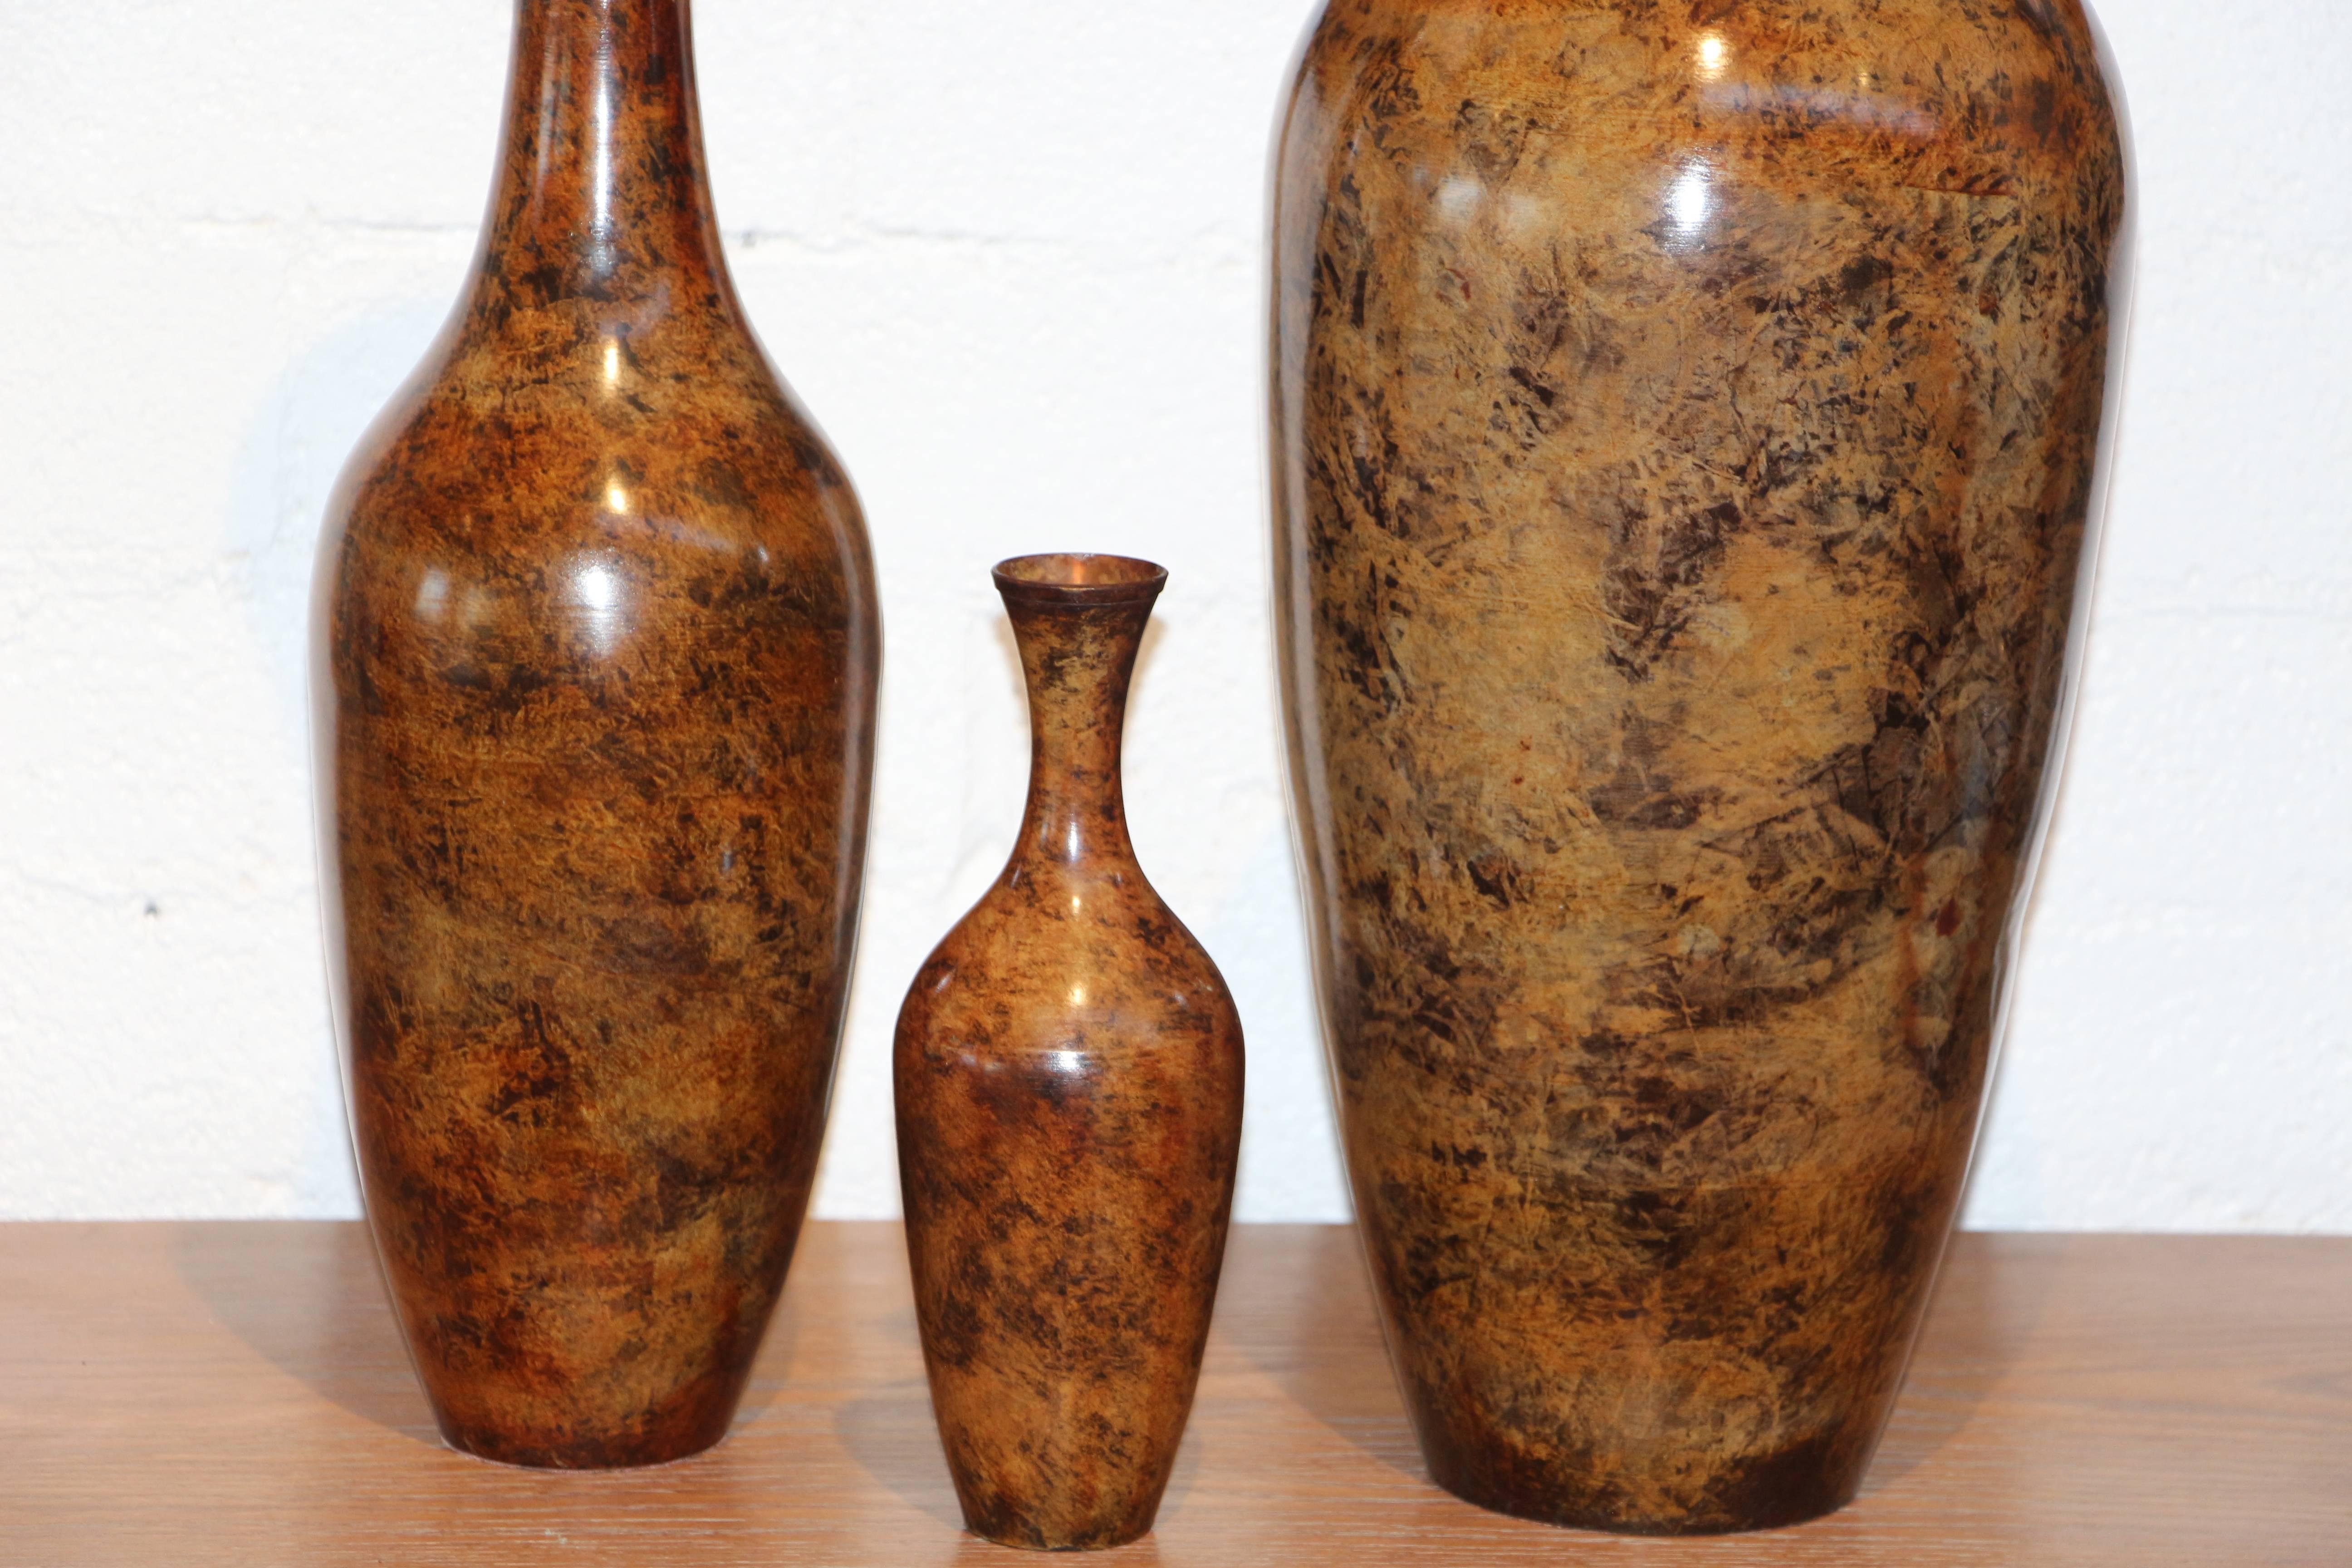 A nice set of three bronze tortoise patinated vases designed by Steve Chase. We are not sure who made them but they are great. Each rime has an added lip and each is scaled to the vase height. The tallest vase is 30 inches tall with a 9 inch